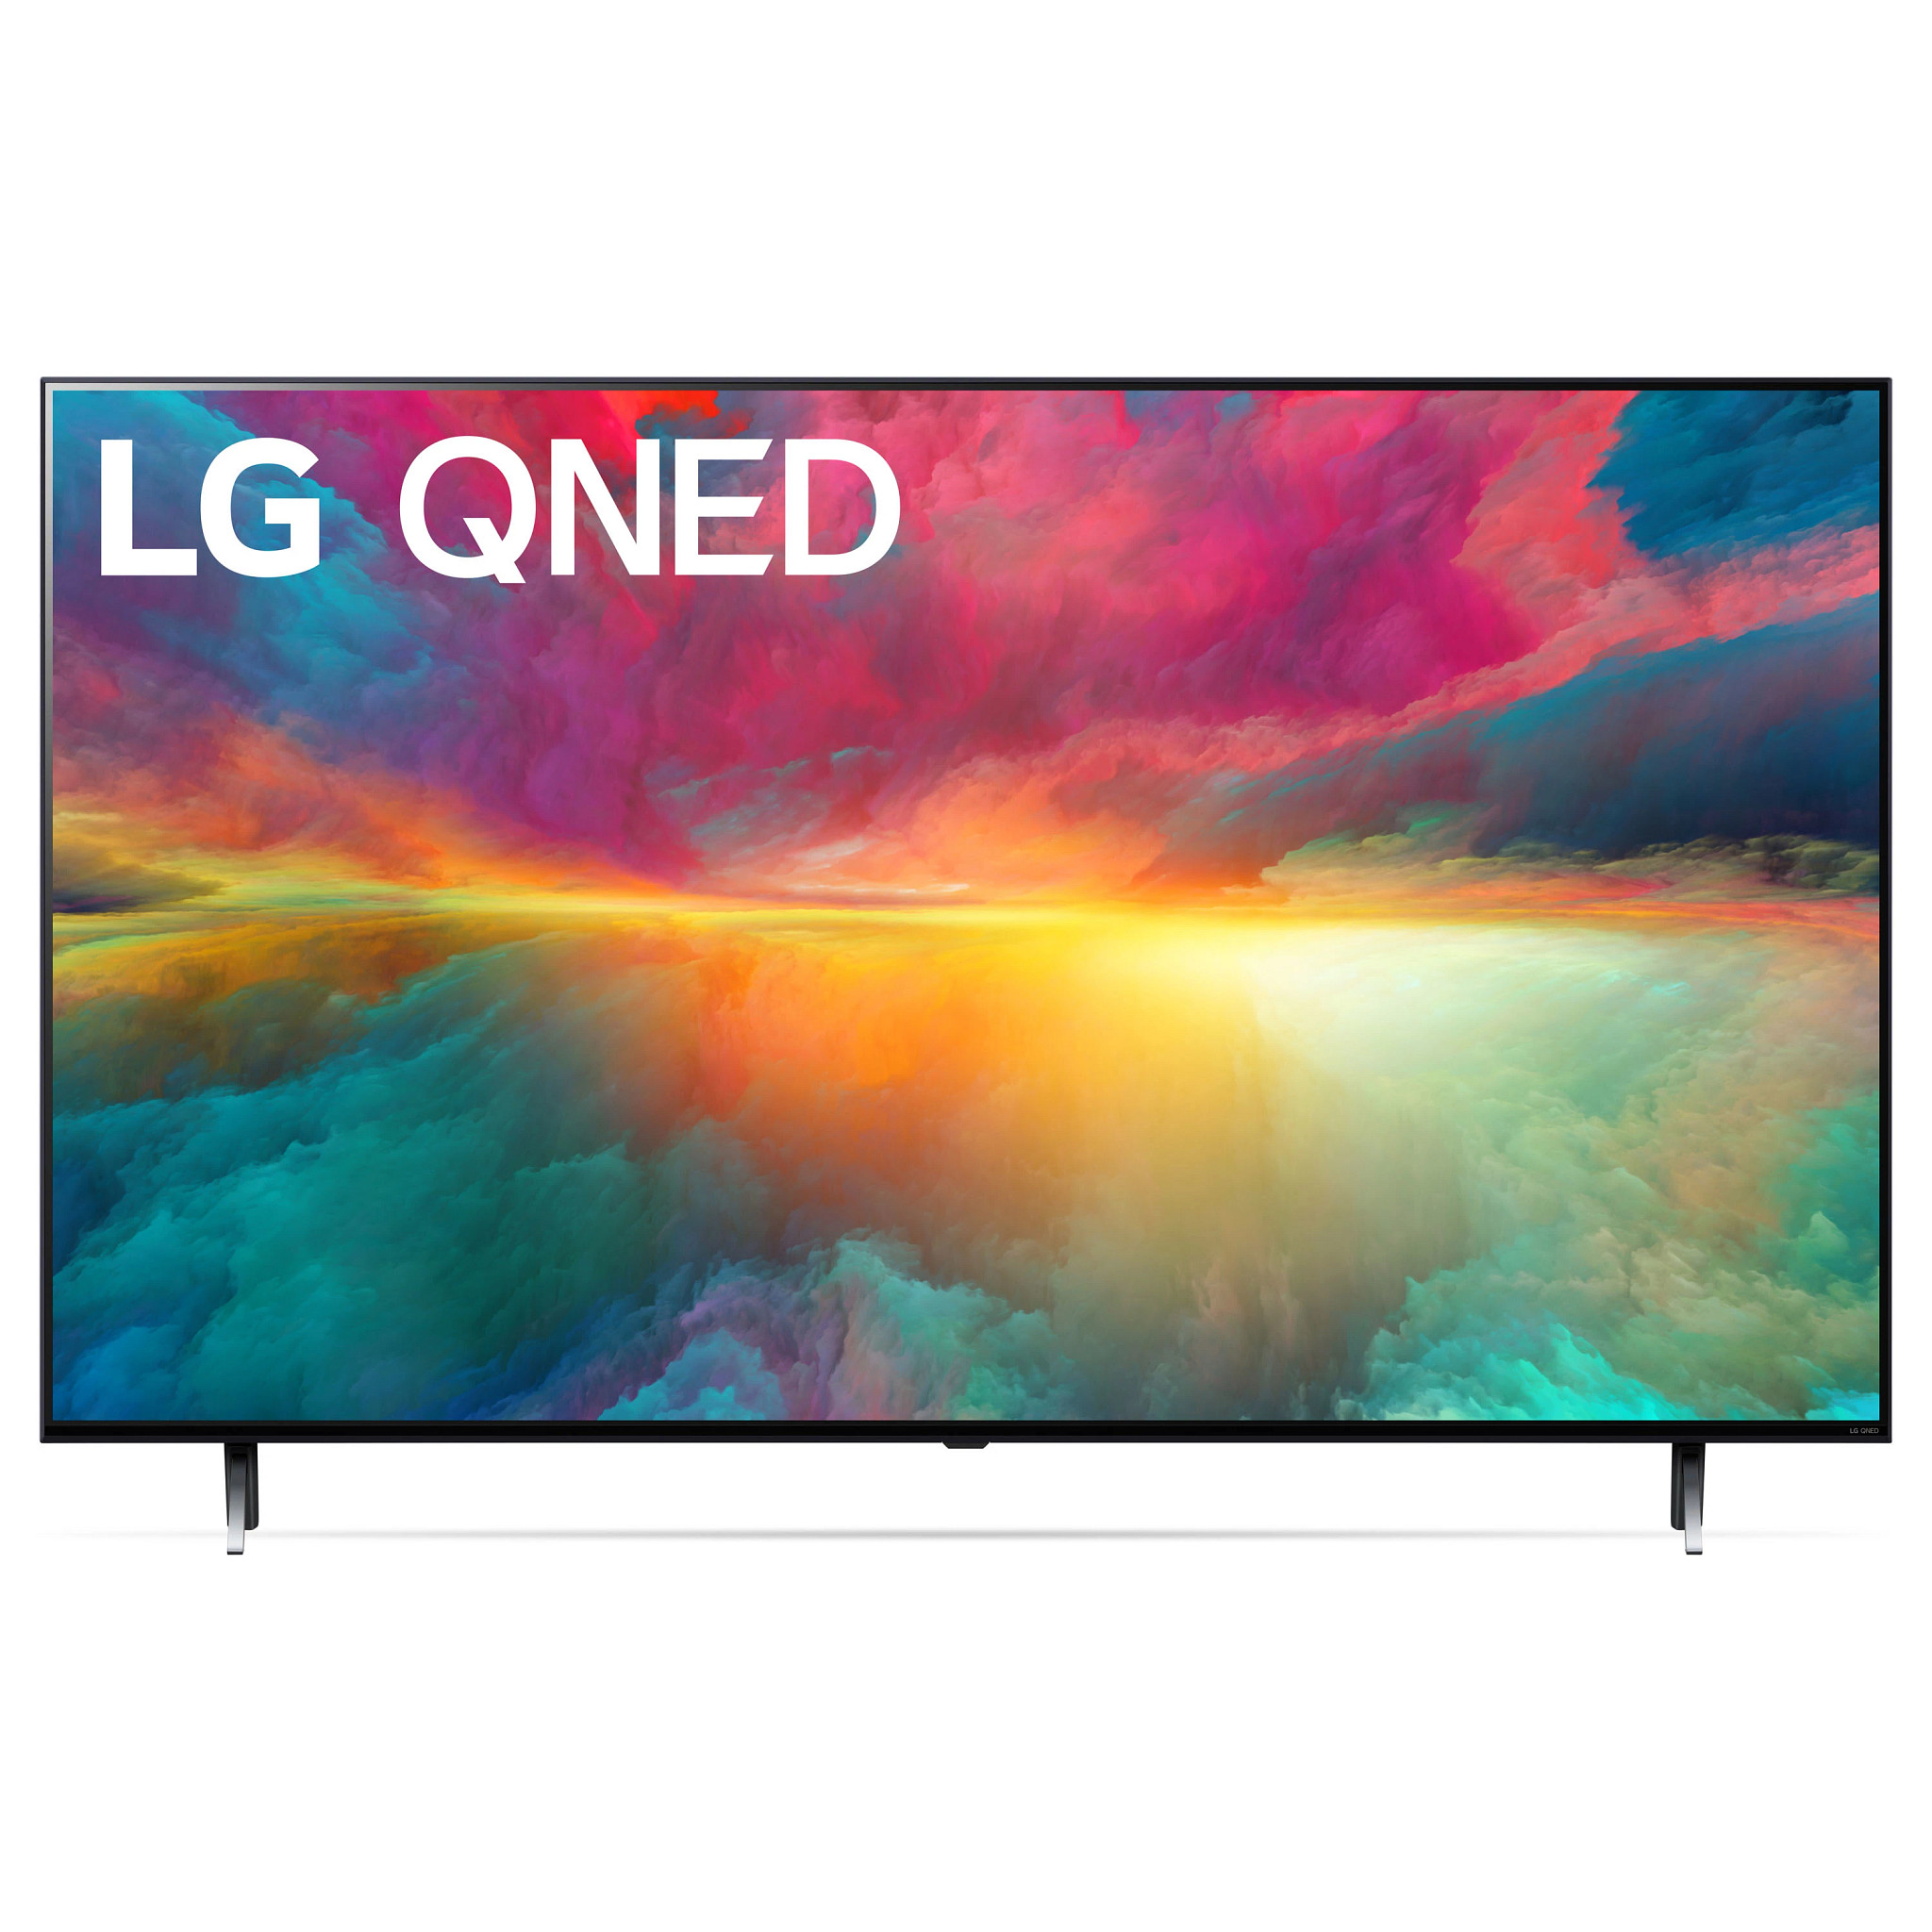 LG 75 inch Class 4K UHD QNED Web OS Smart TV with HDR 75 Series (75QNED75URA) - image 1 of 7